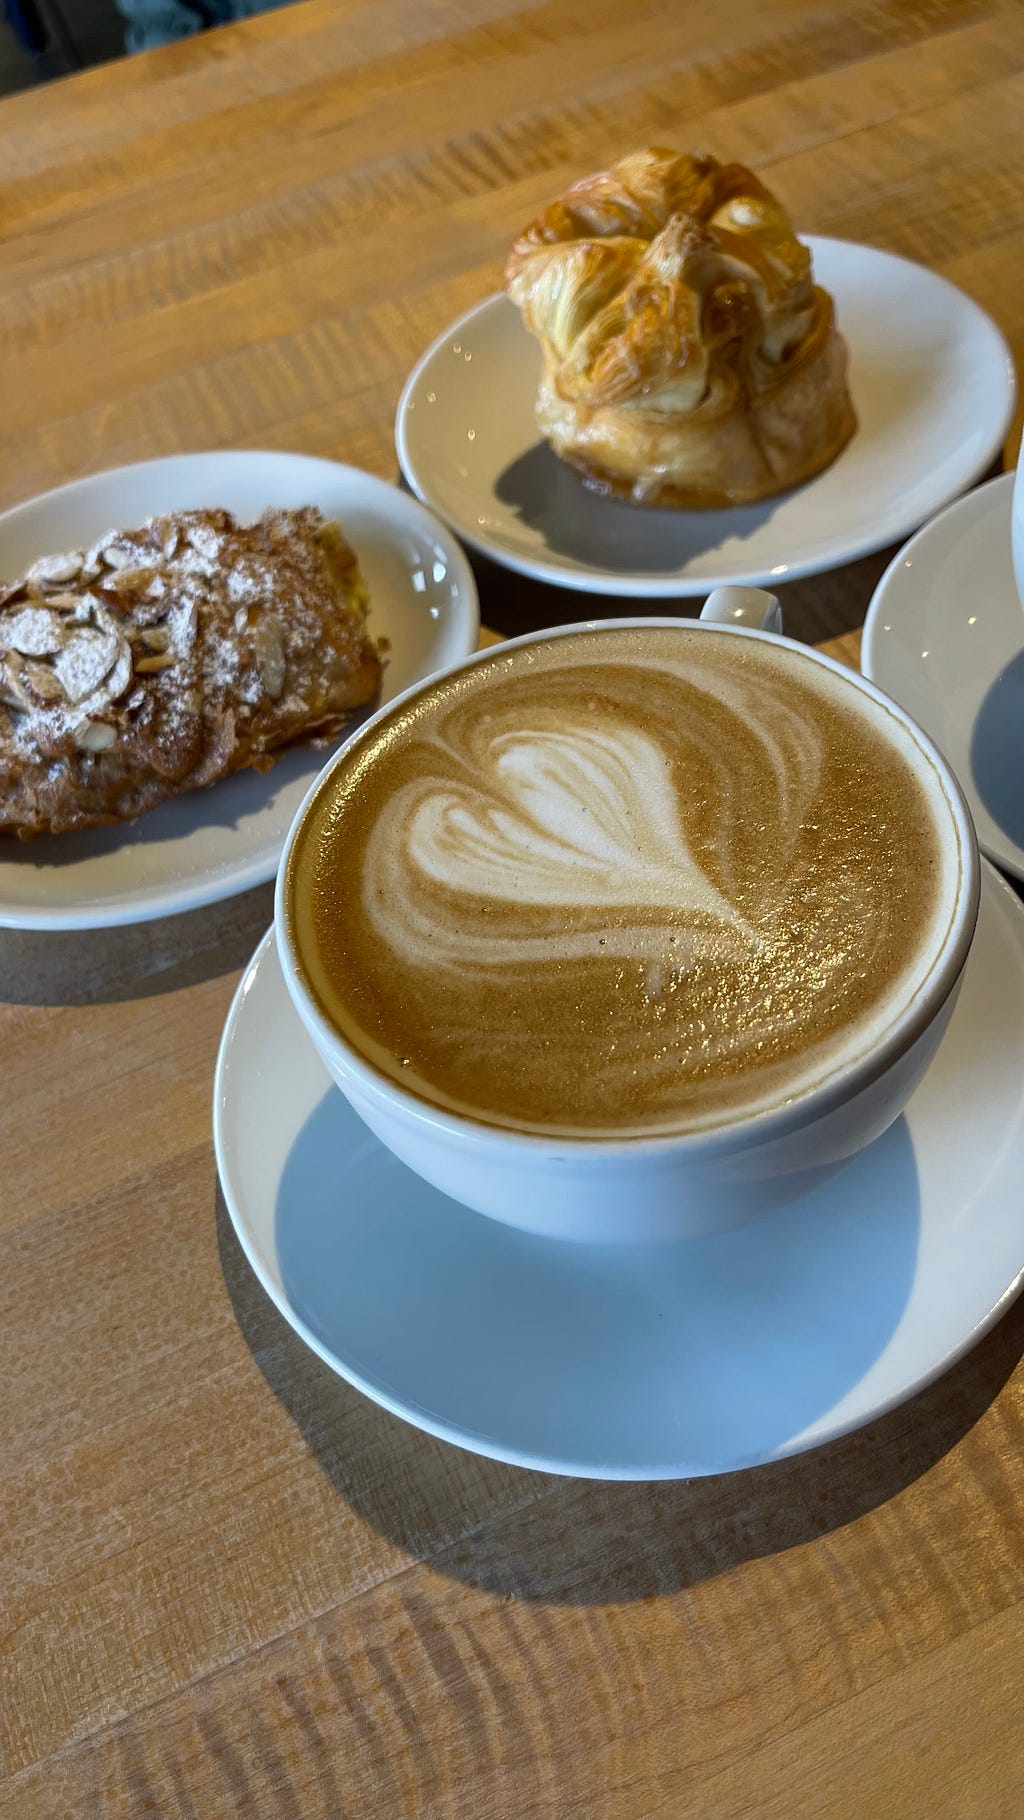 A latte with heart-shaped foam art in a white cup and pastries arranged behind it